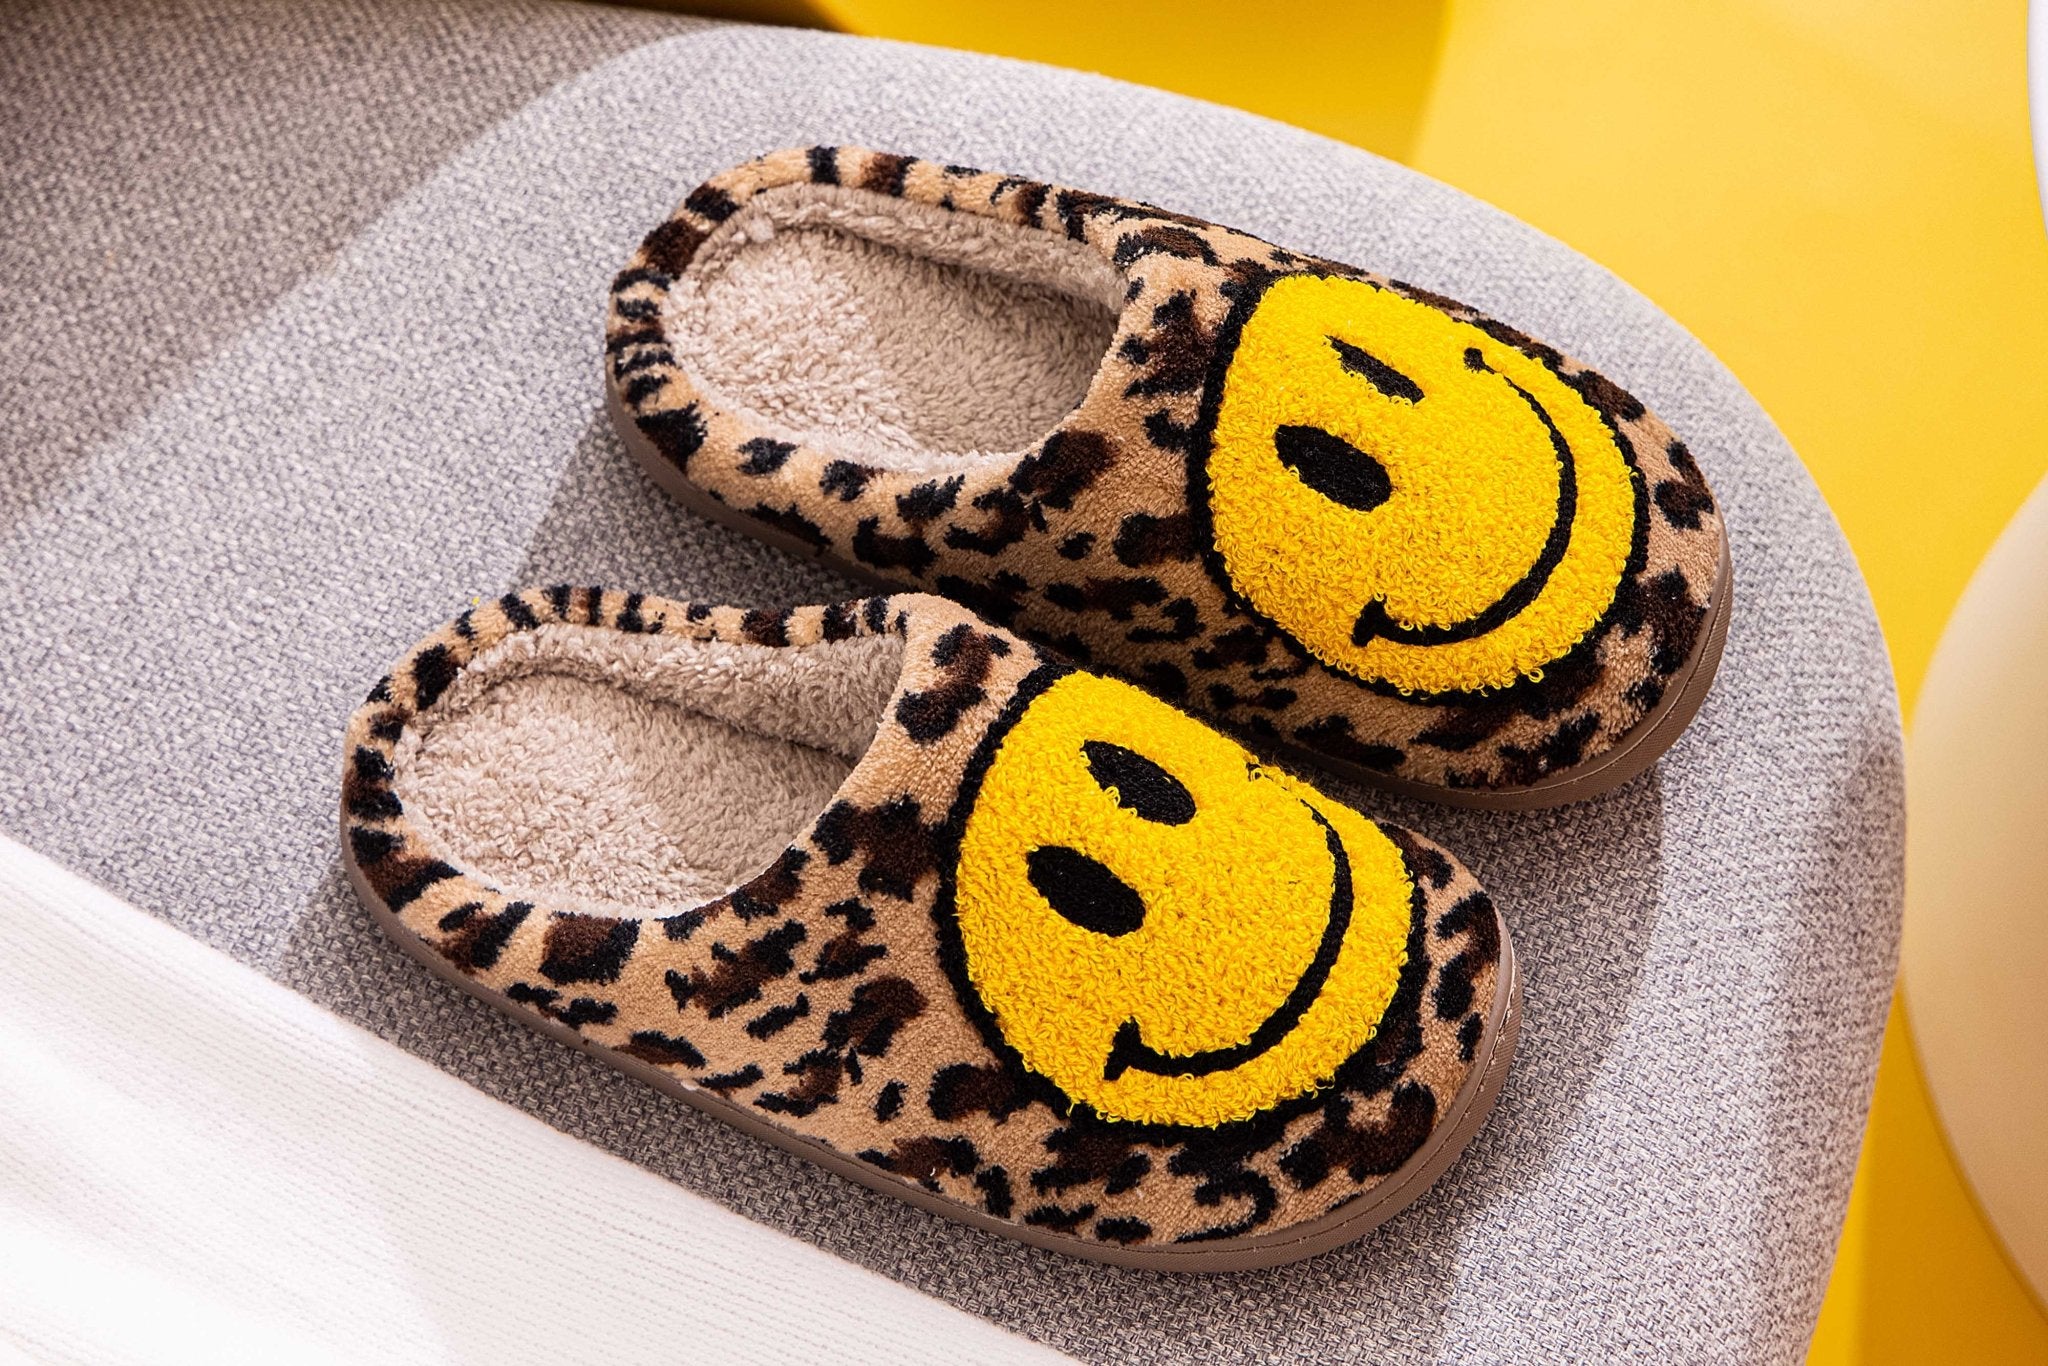 Smiley Face Fluffy Slippers (Leopard) - Small (5.5-6.5/37-38) - Slippers